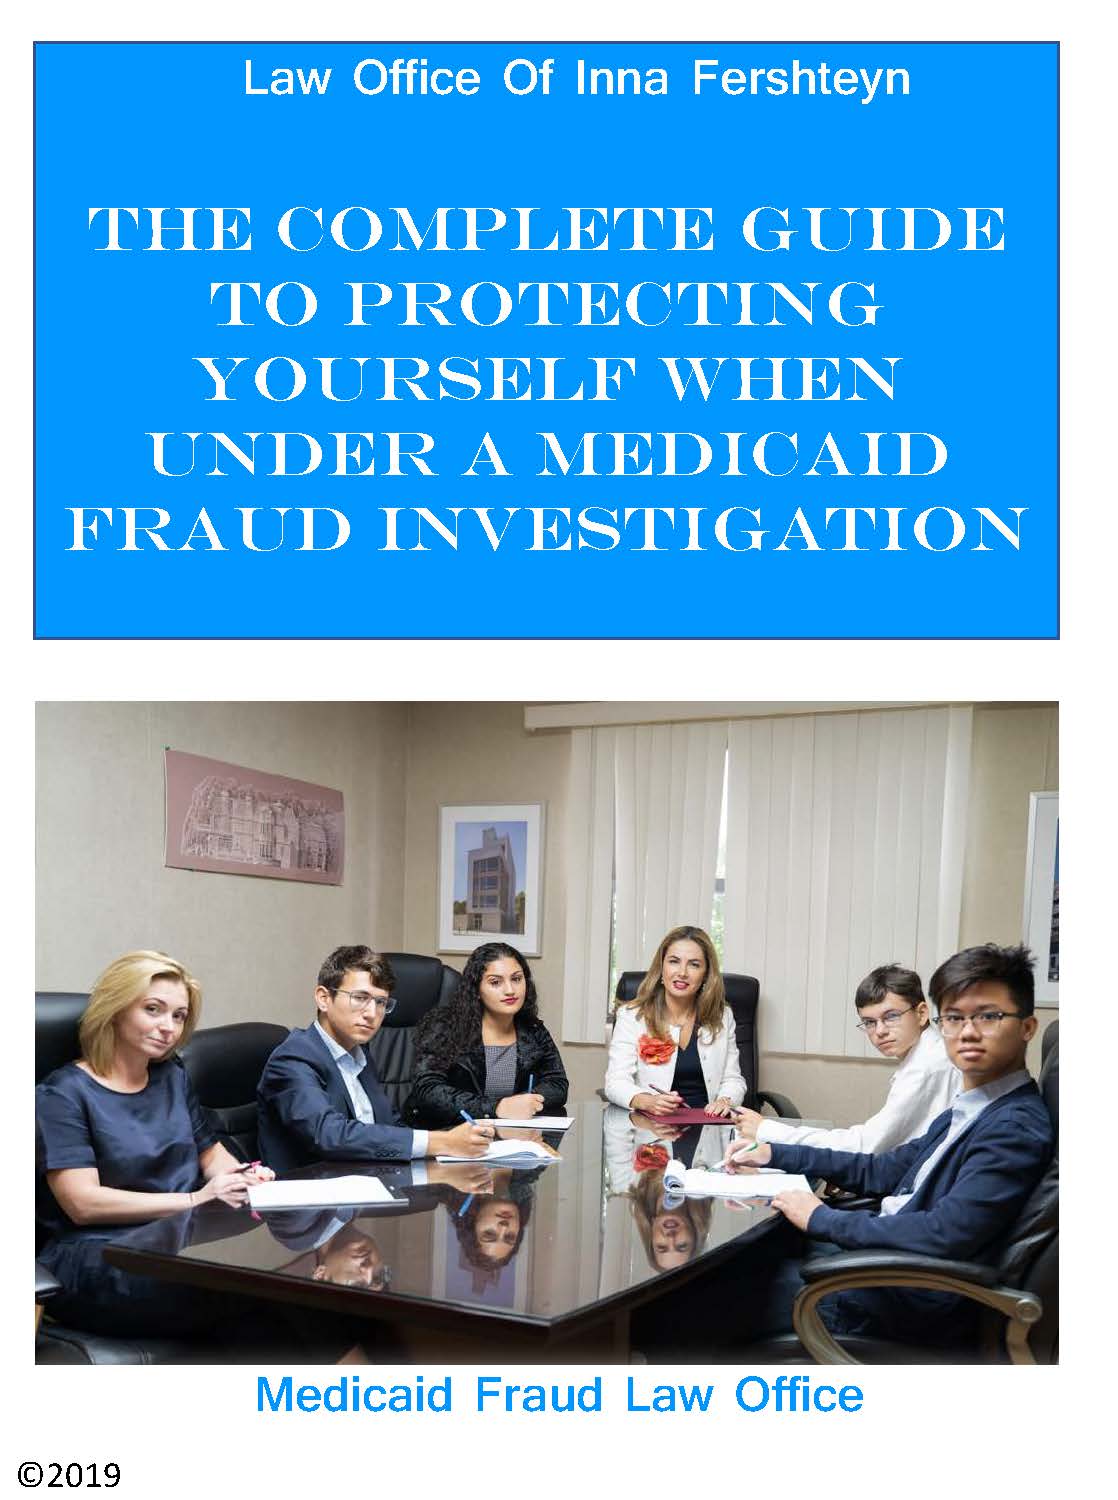 The Complete Guide To Protecting Yourself When Under A Medicaid Fraud Investigation in New York from Inna Fershteyn NY Medicaid Fraud Attorney